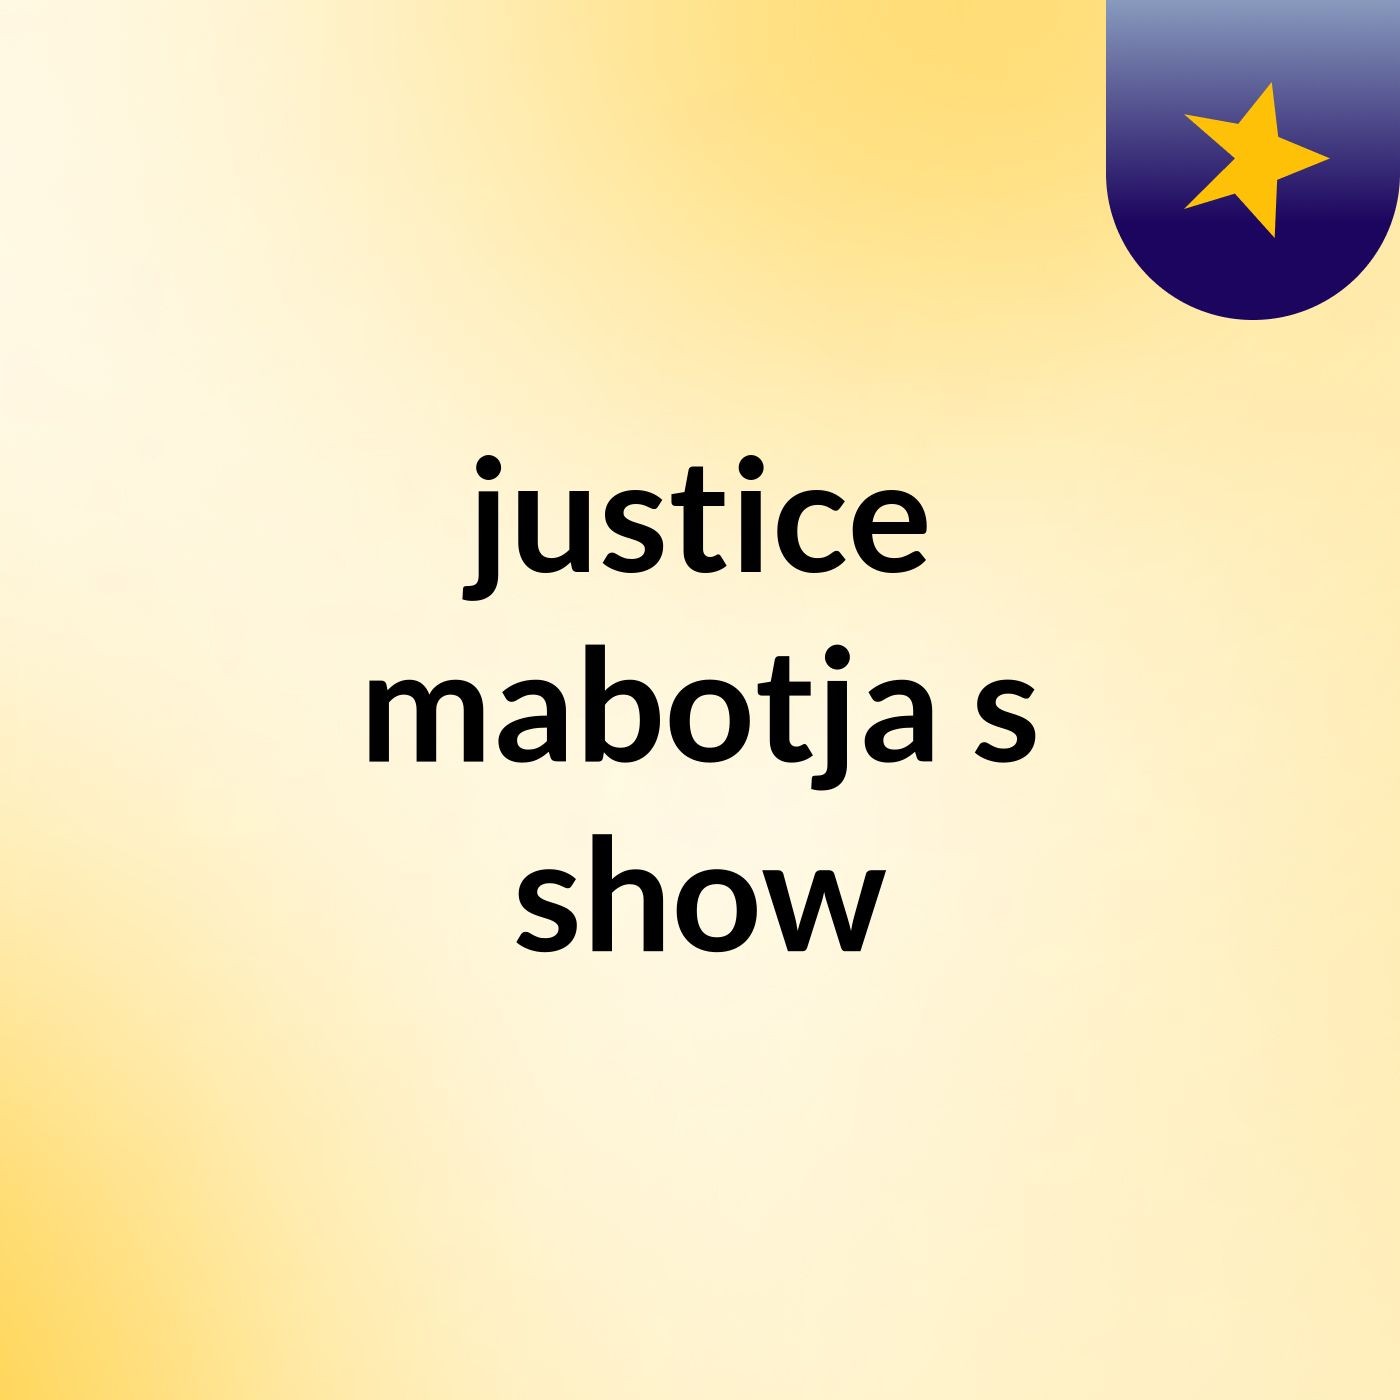 justice mabotja's show